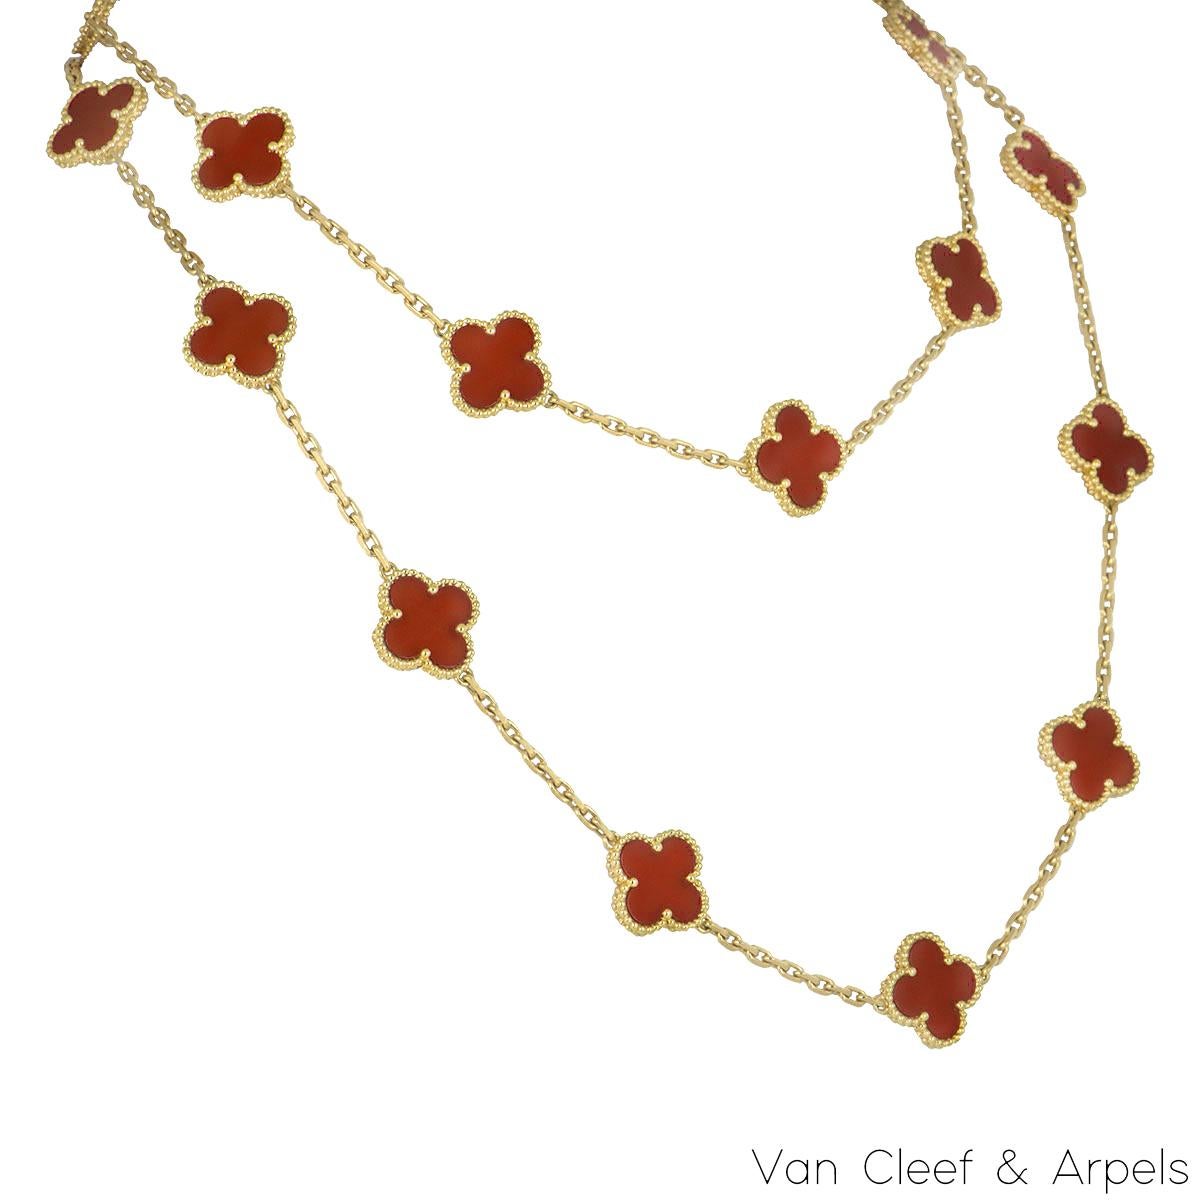 A beautiful 18k yellow gold carnelian necklace from the Vintage Alhambra collection by Van Cleef & Arpels. Featuring 20 iconic clover motifs, each motif is set with a beaded edge and a carnelian inlay, set throughout the length of the necklace. The